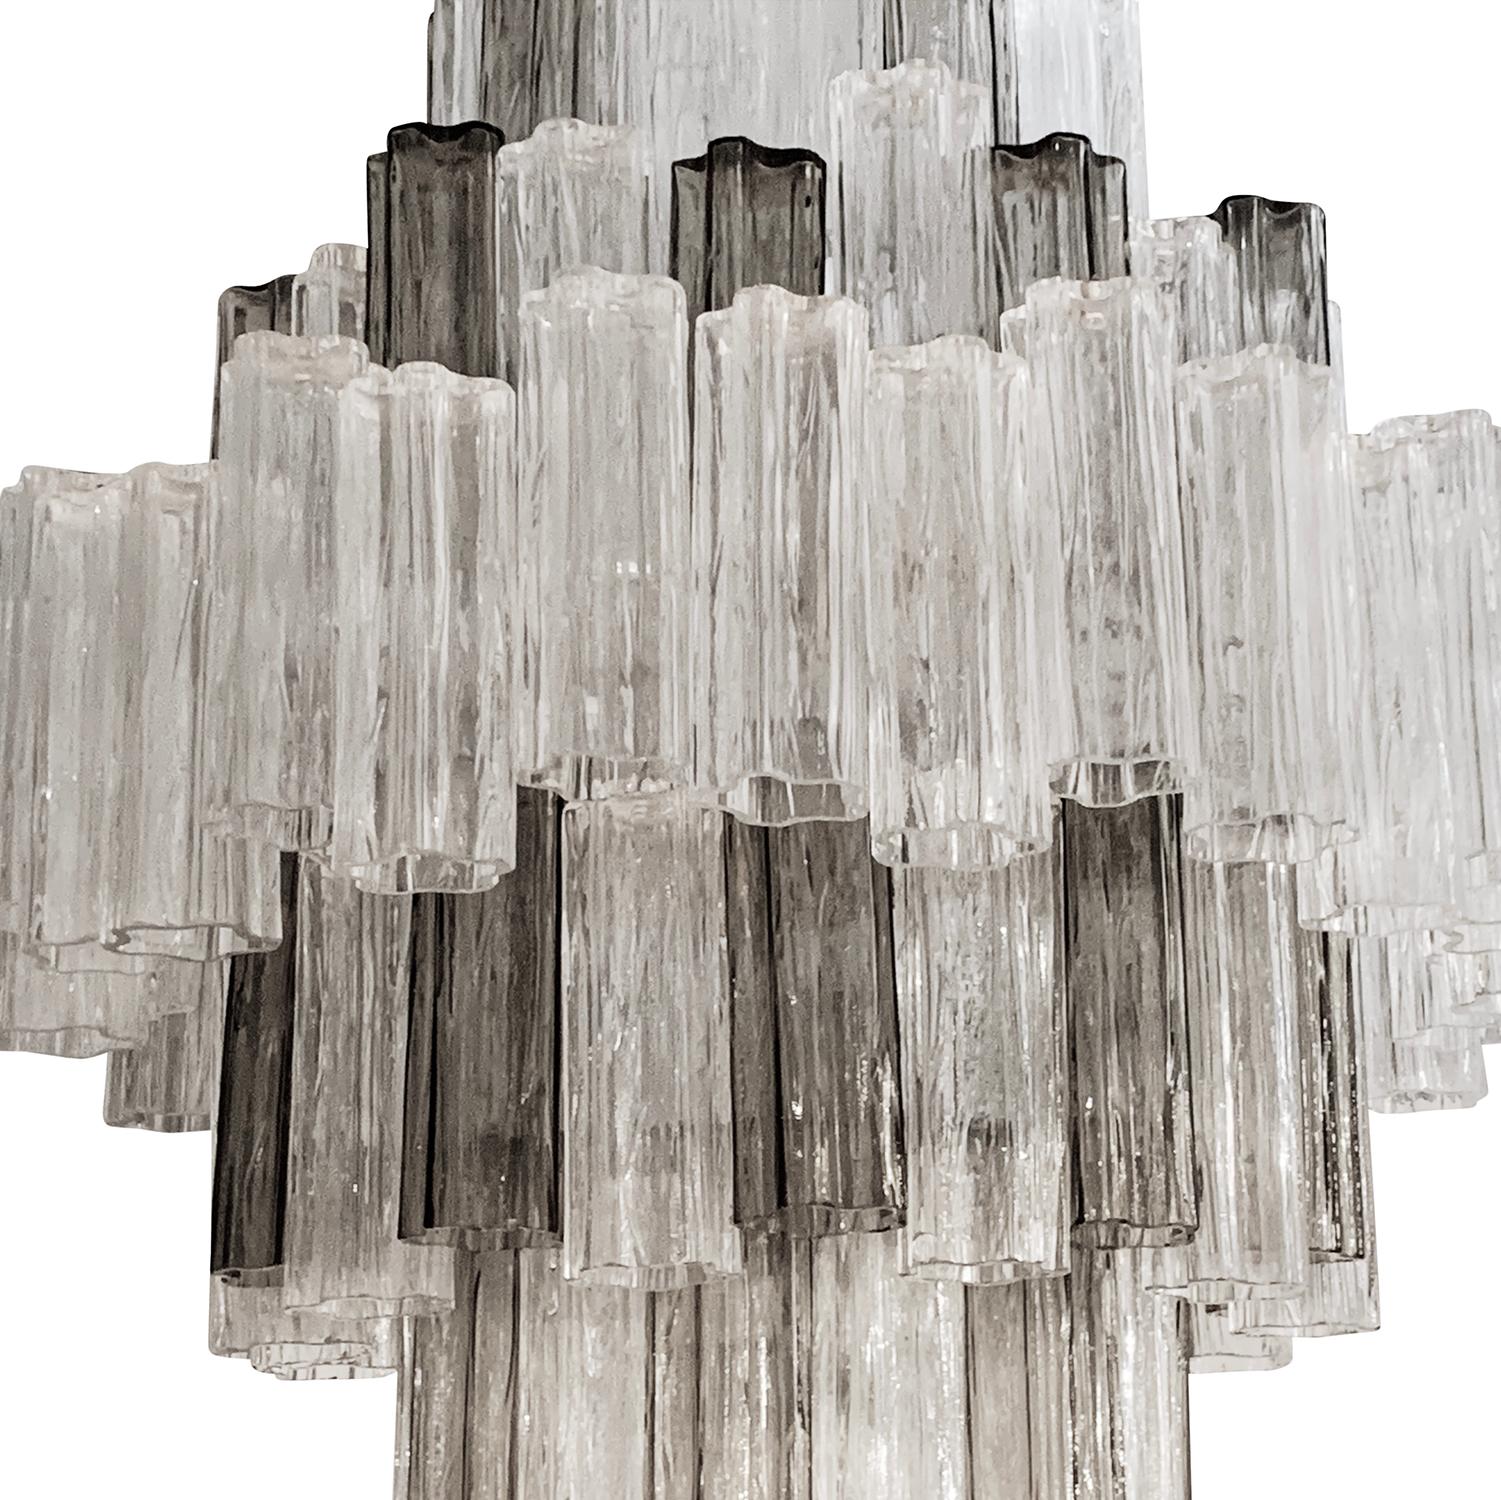 Hand-Crafted 20th Century Italian Eight Tiered Murano Glass Chandeliers by Venini & Zuccheri For Sale